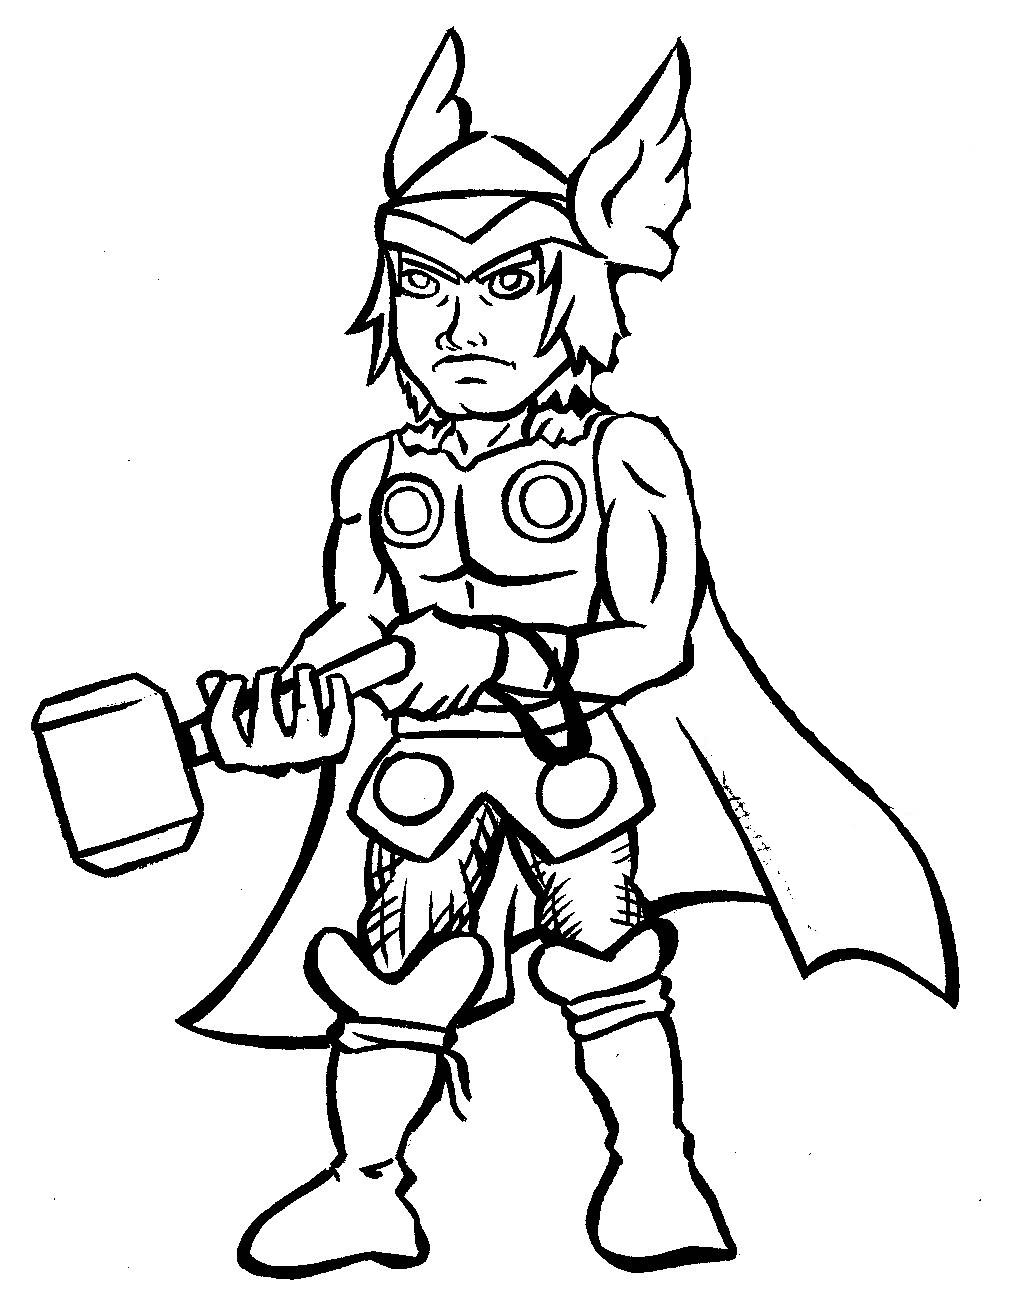 thor-coloring-pages-for-kids-thor-hellokids-captain-hulk-doghousemusic